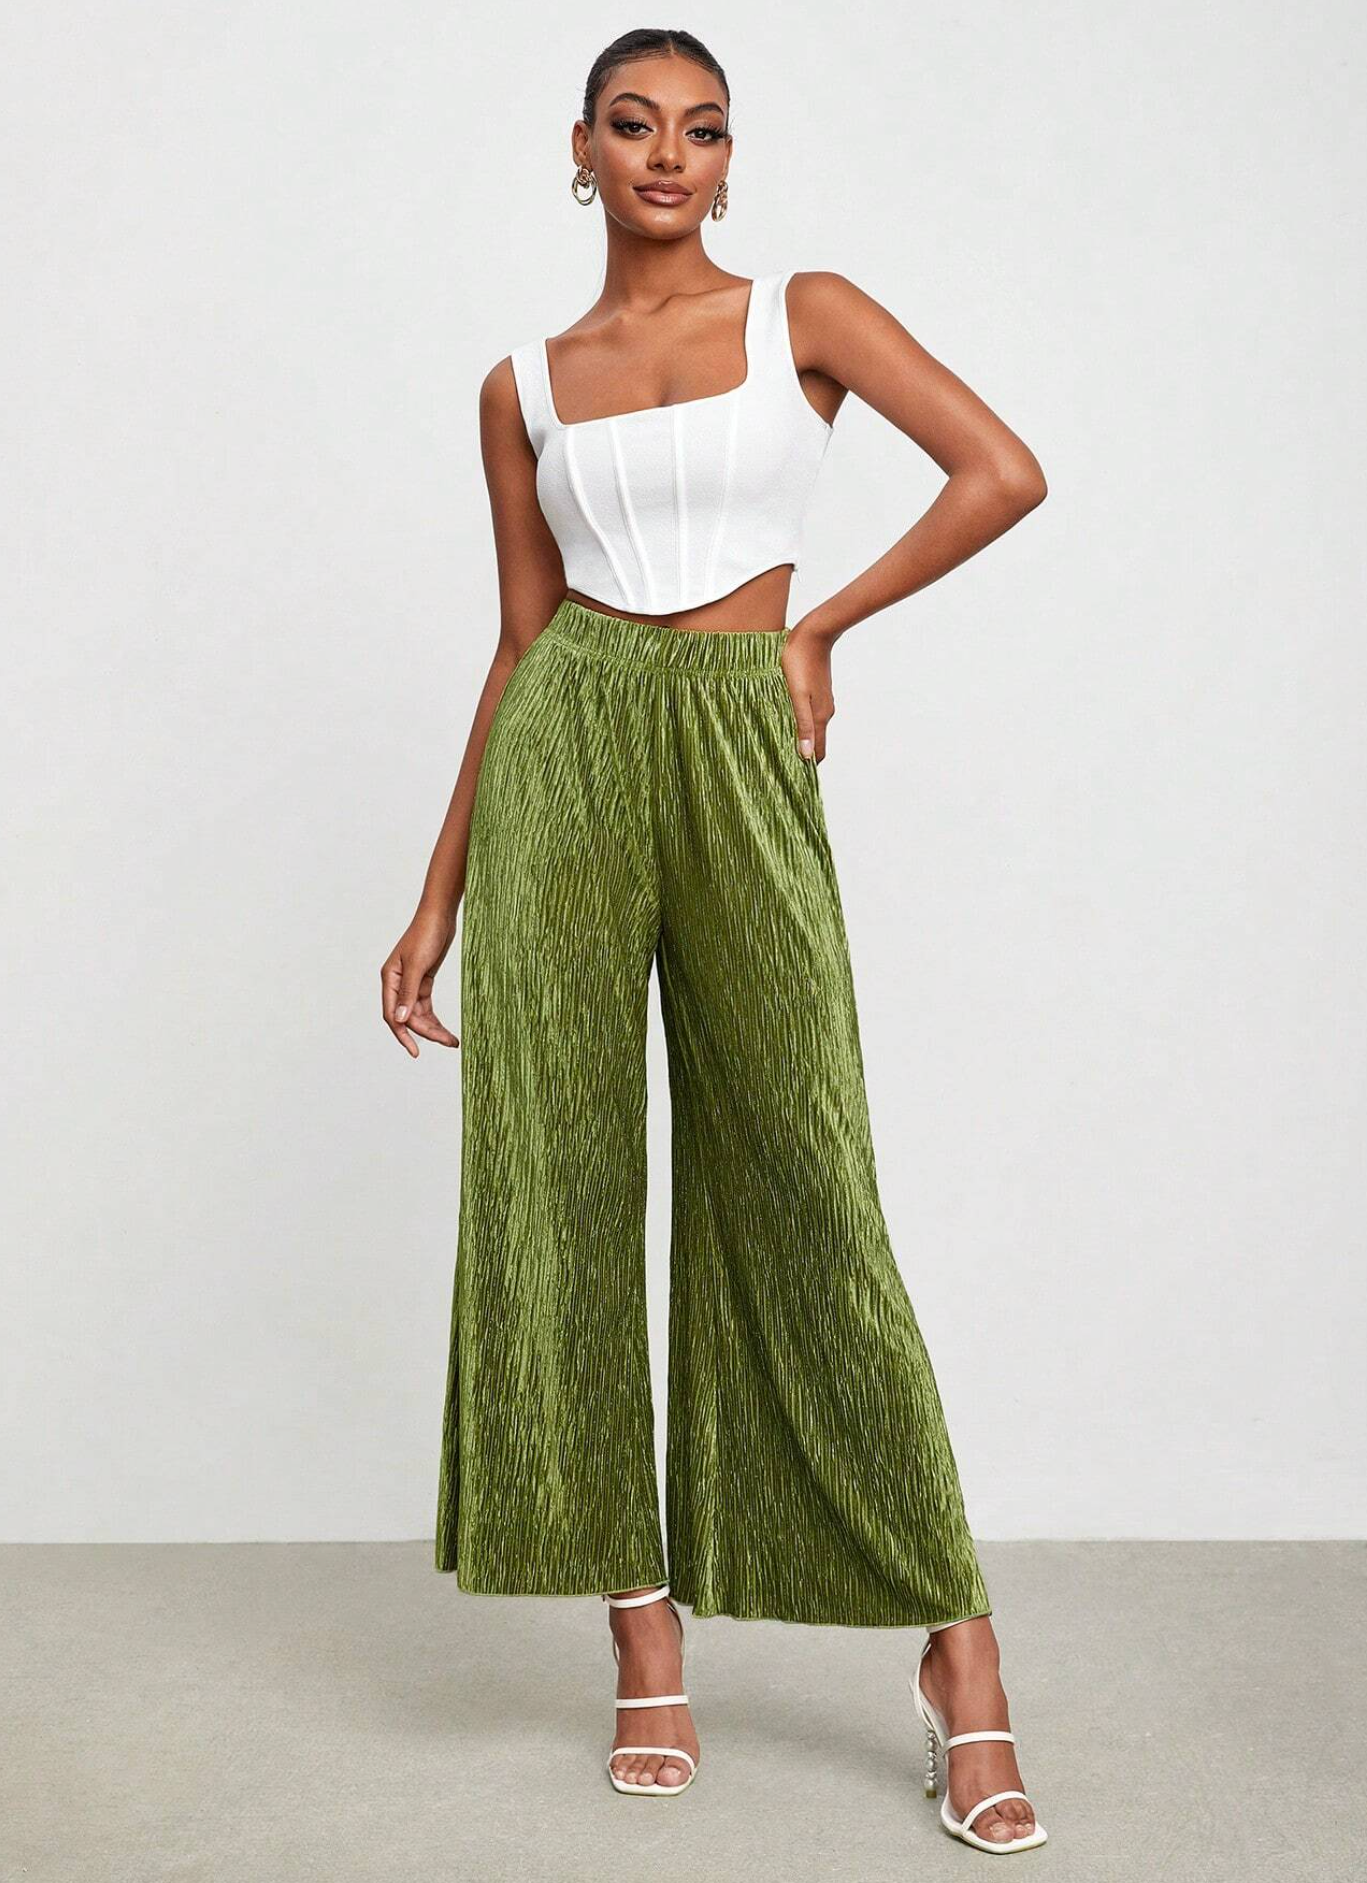 BELANGE HANDMADE X SHEIN - Solid Plisse Wide Leg Pants - Available on SHEIN.COM Only